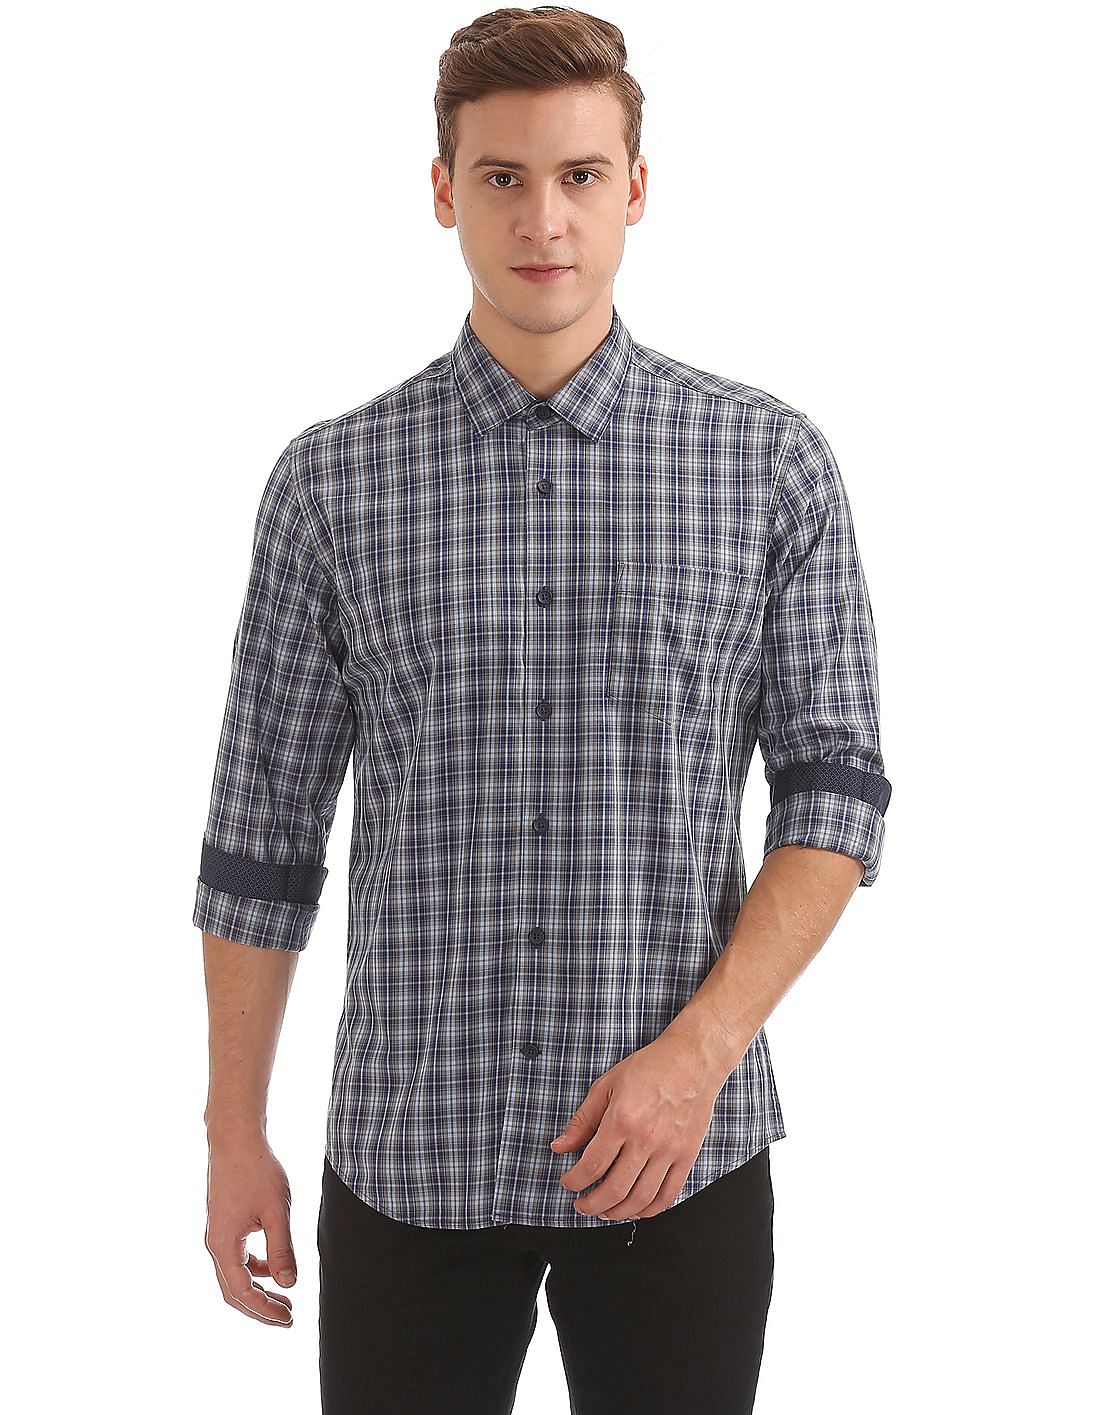 Buy AD by Arvind Slim Fit Check Shirt - NNNOW.com